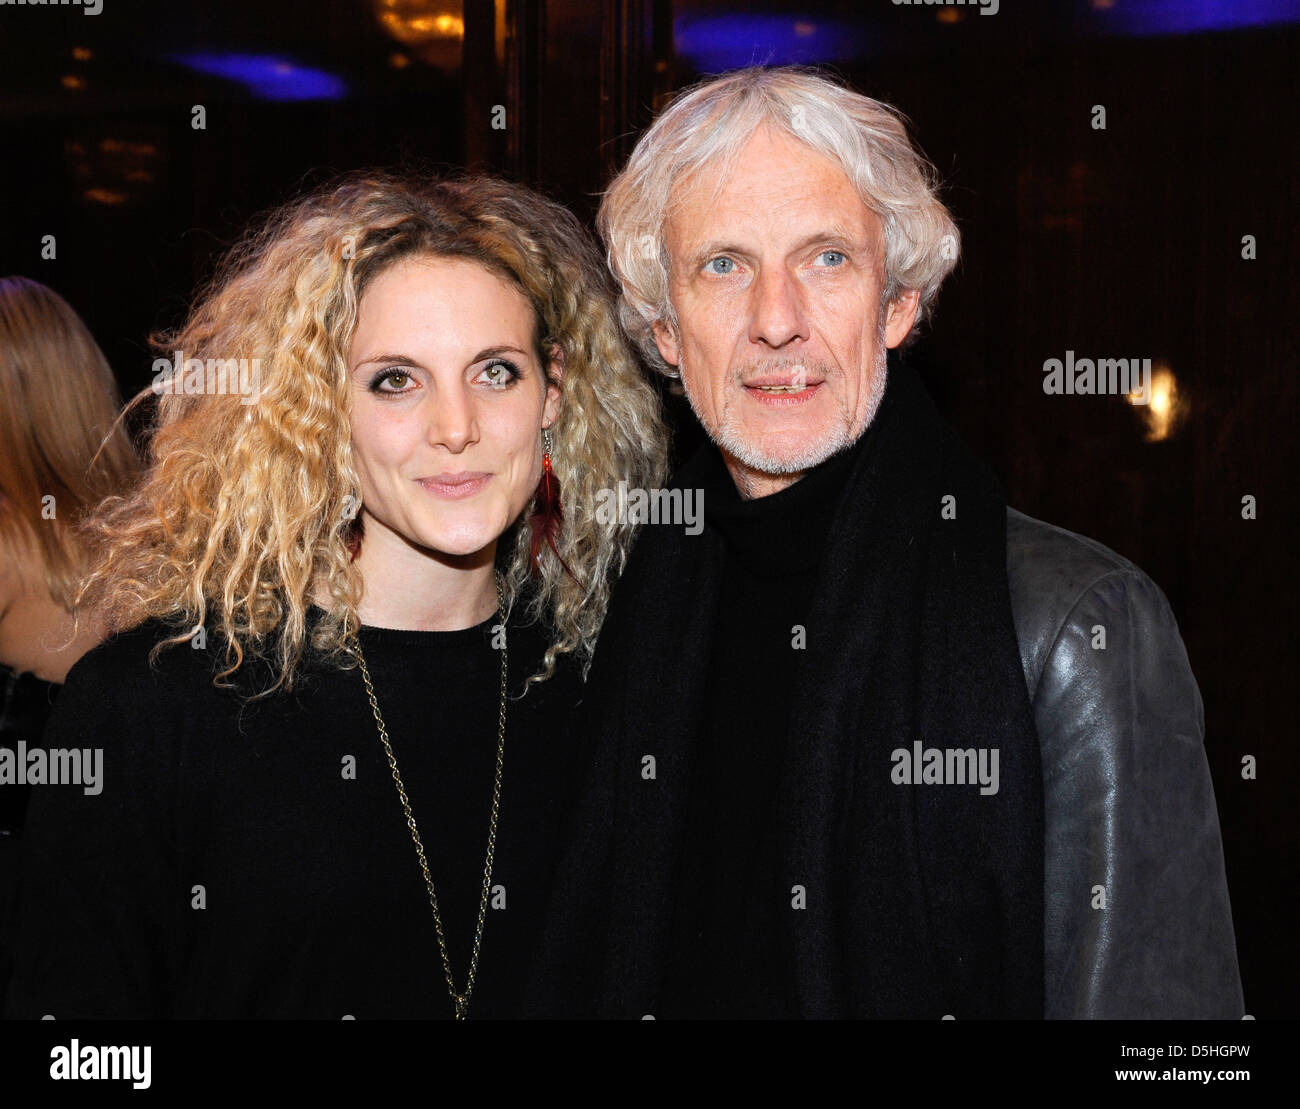 German actor Mathieu Carriere (R) and Austrian actress Barbara Lanz (L) attend the 'Movie meets Media' party winthin the scope of 60th Berlinale International Film Festival in Berlin, Germany, 12 February 2010. The festival runs until 21 February 2010. Photo: Soeren Stache Stock Photo